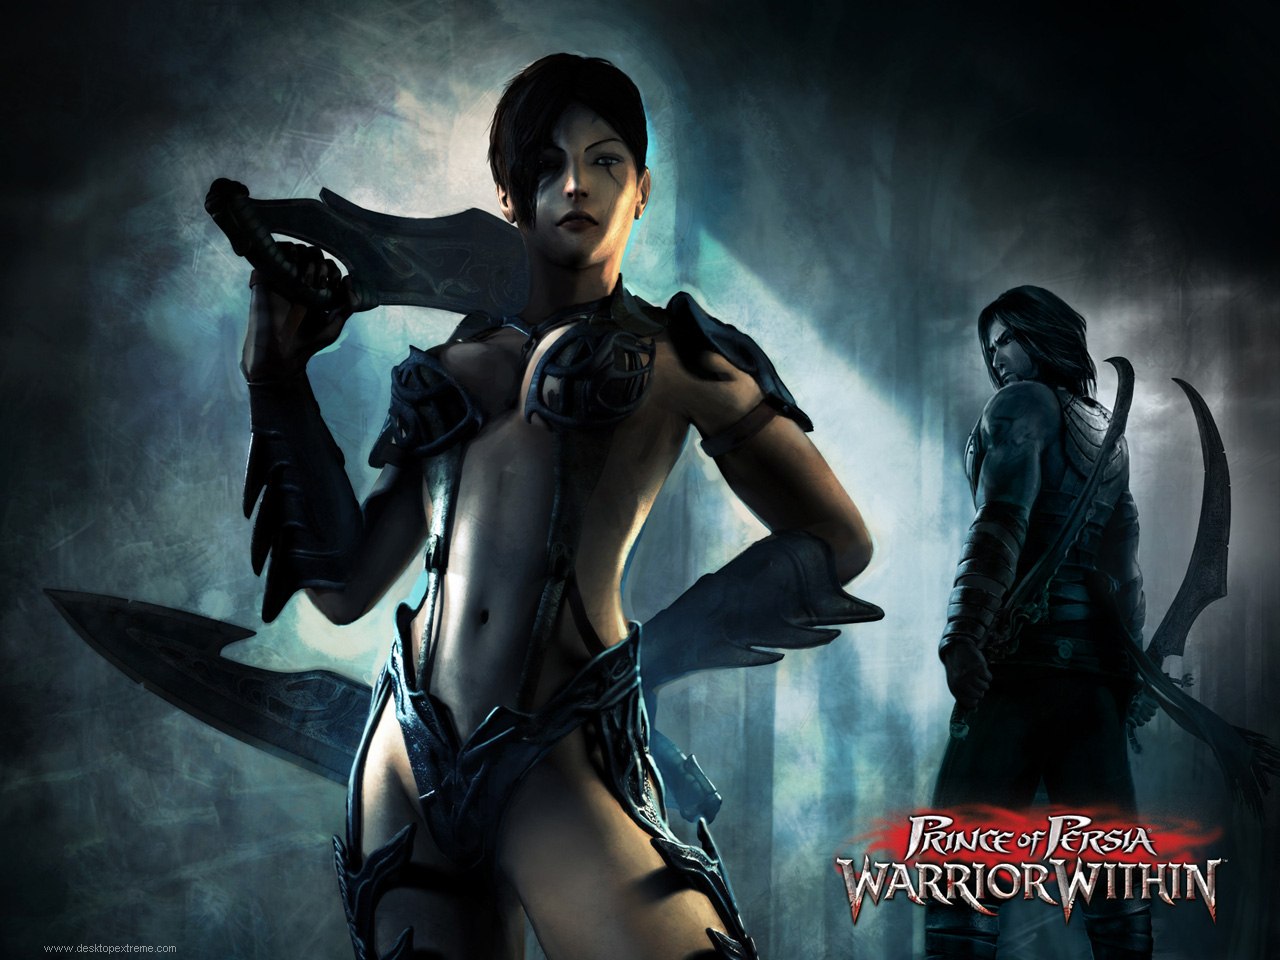 video game, prince of persia: warrior within images